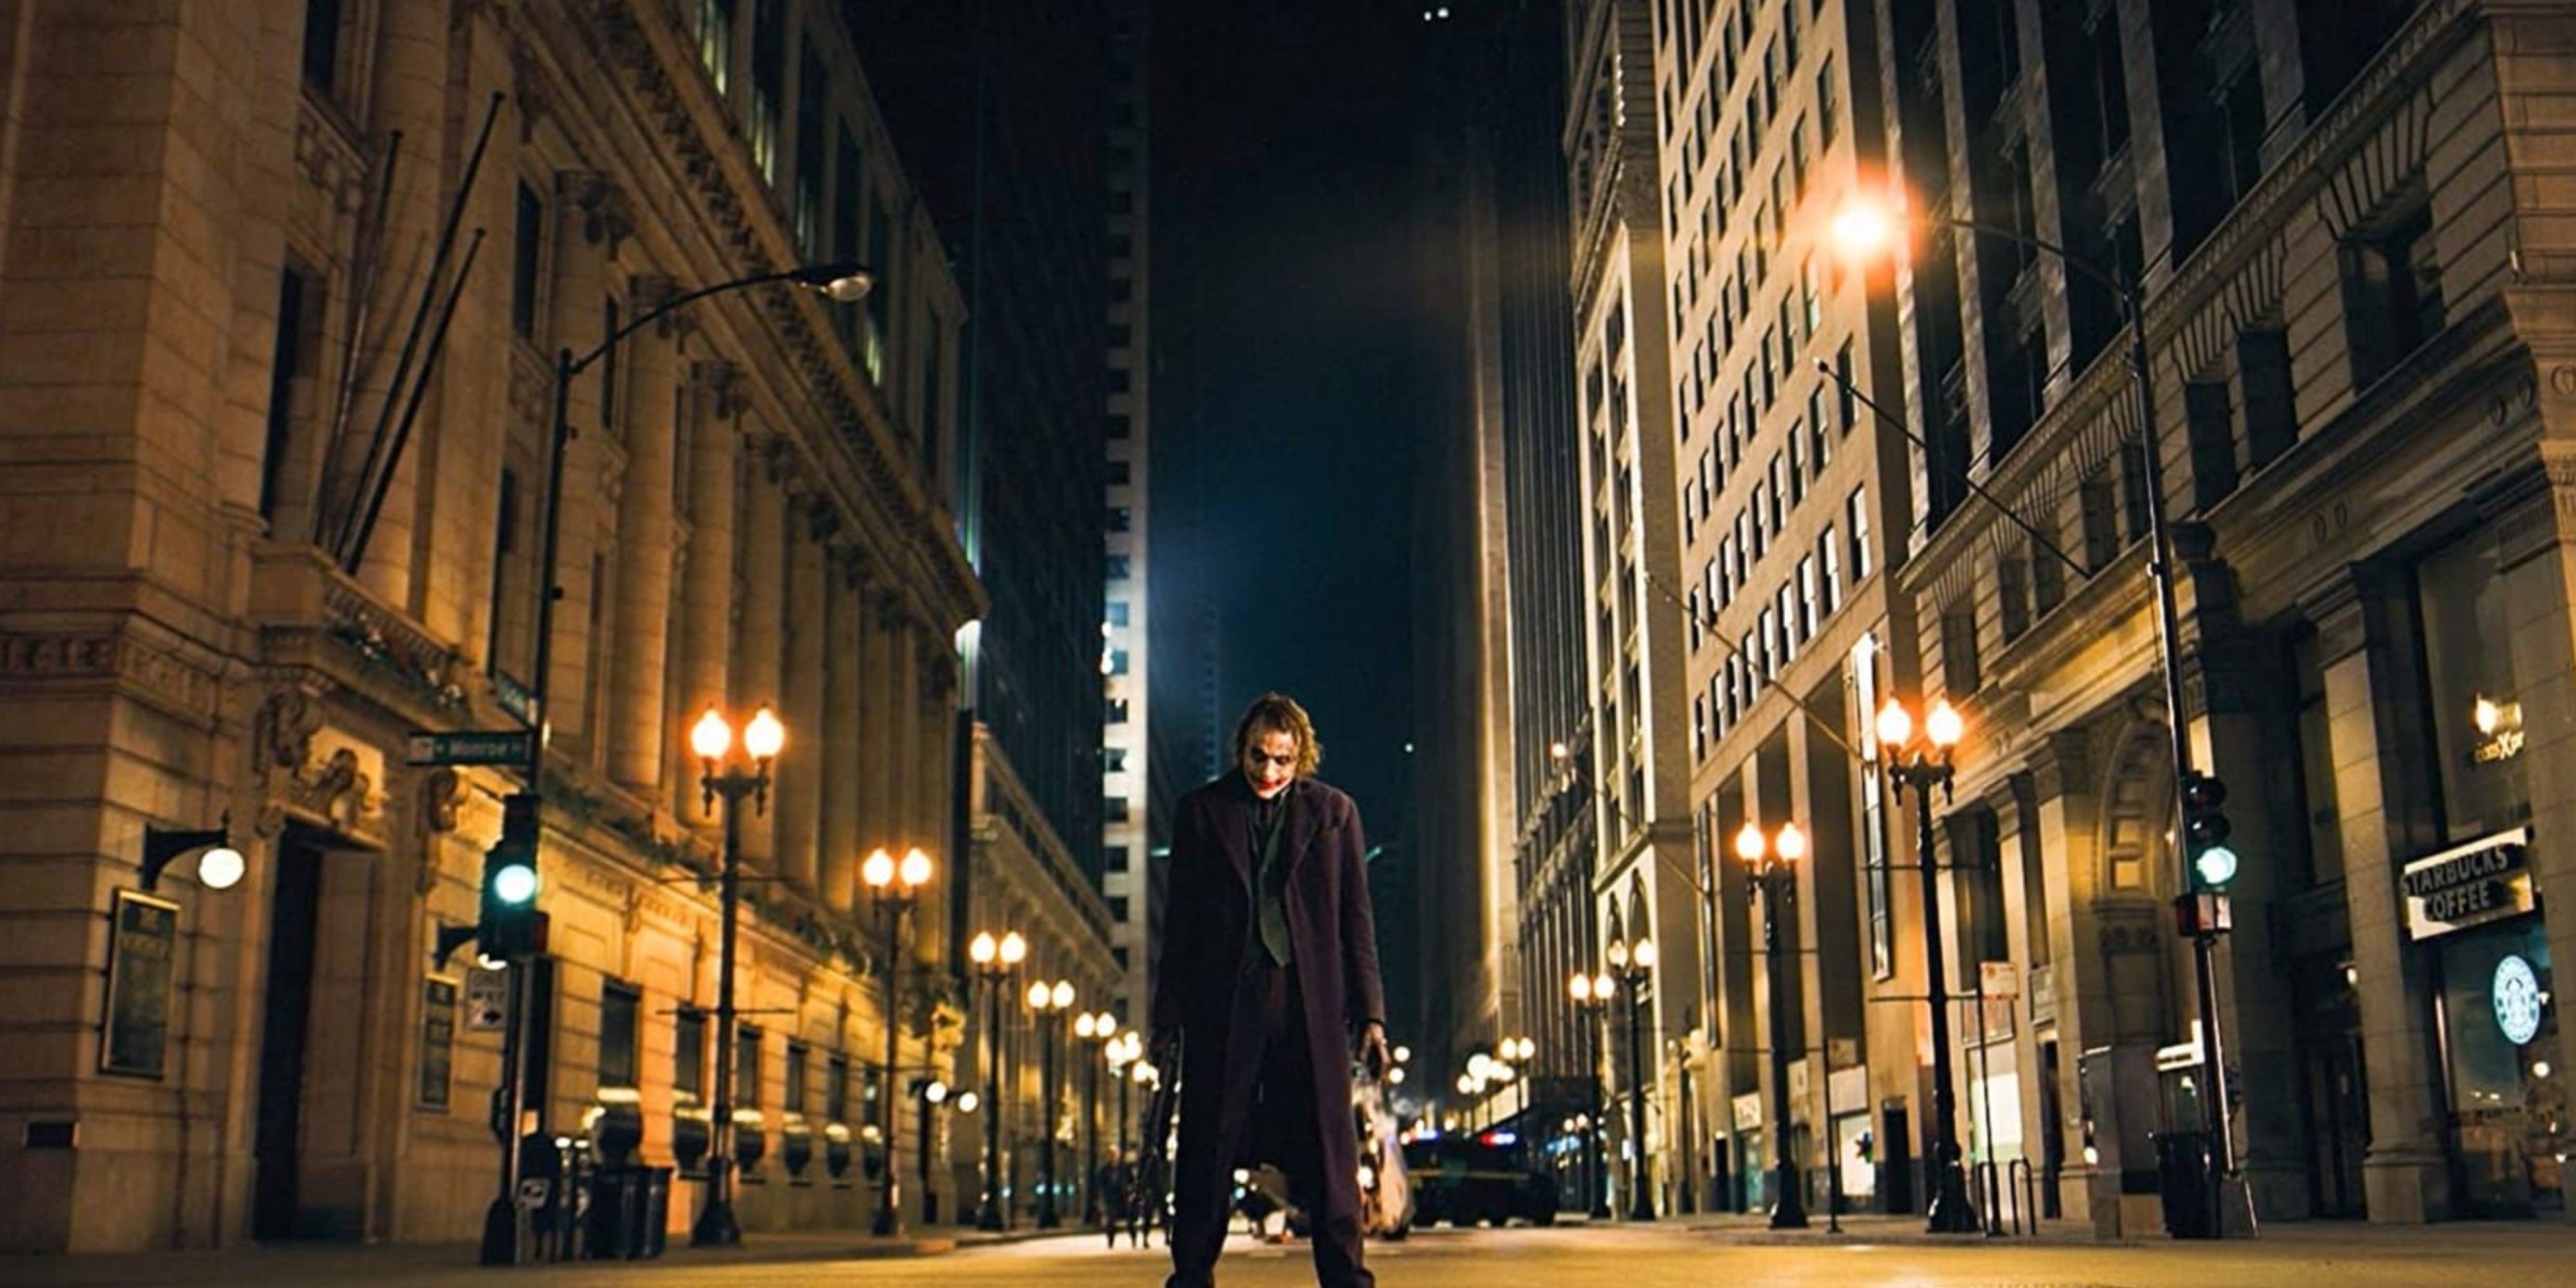 The Joker standing in the middle of an empty street in The Dark Knight